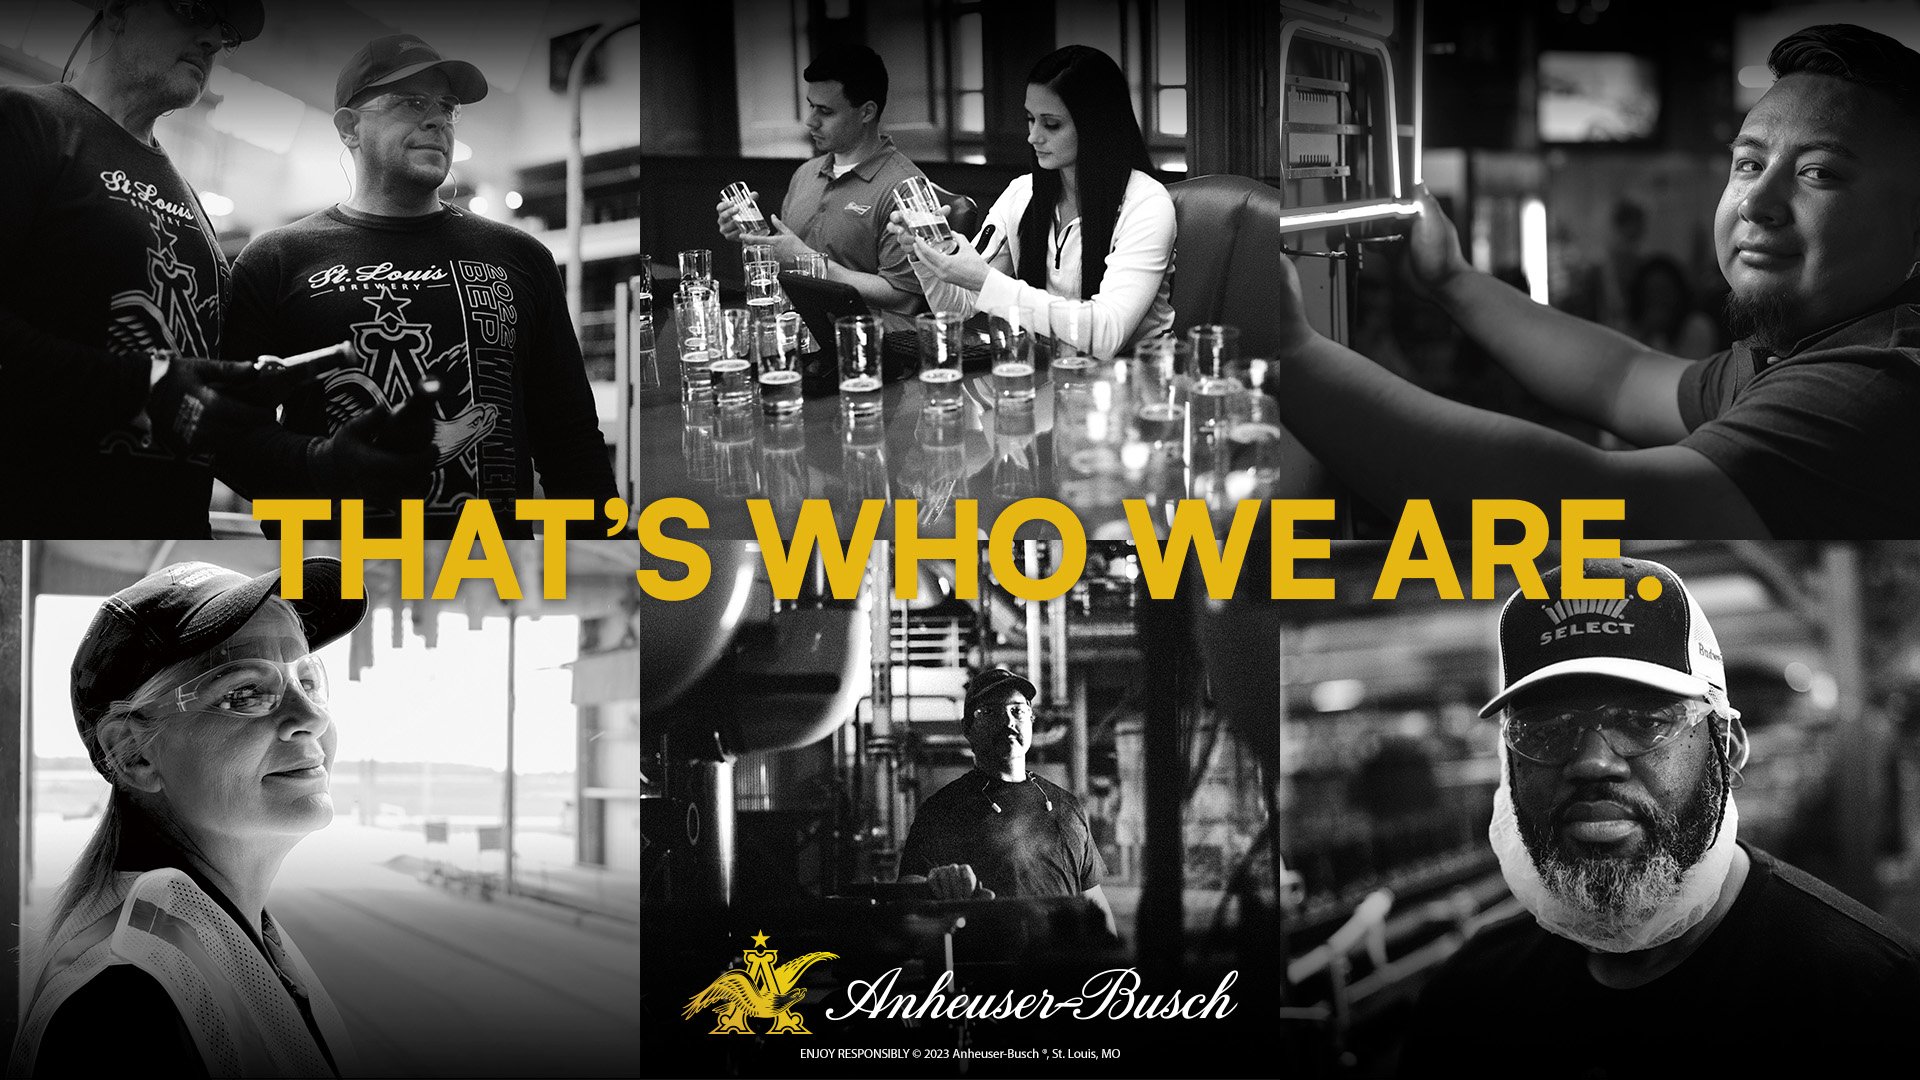 Anheuser-Busch Celebrates the People and Partners that Work to Create a Future with More Cheers